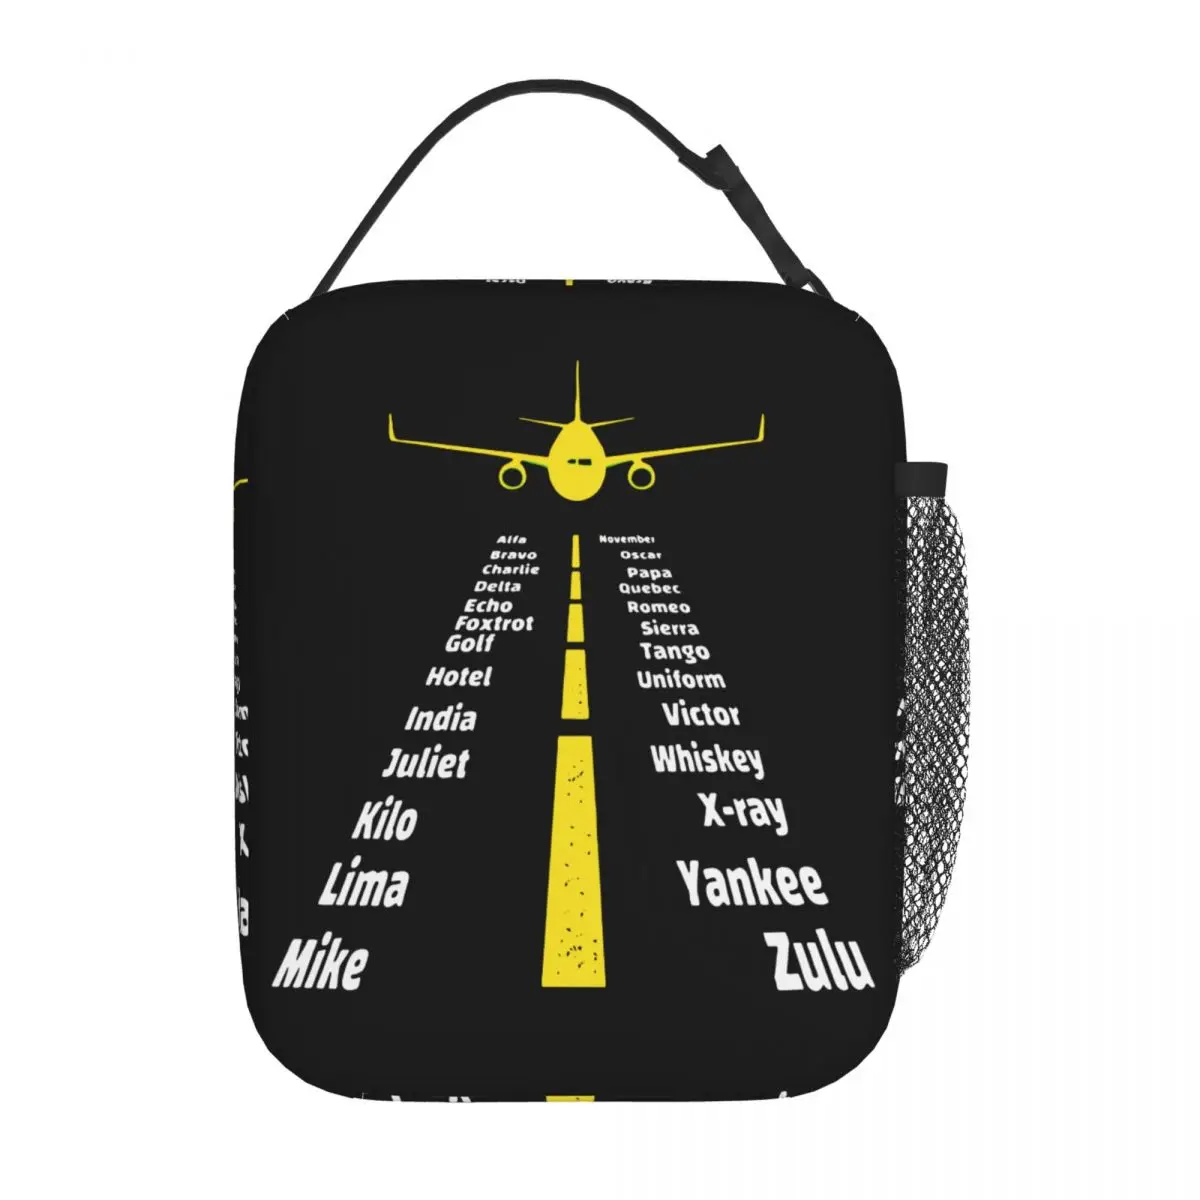 

Phonetic Alphabet Airplane Insulated Lunch Bag Thermal Meal Container Pilot Gift Leakproof Lunch Box Tote for Men Women Work